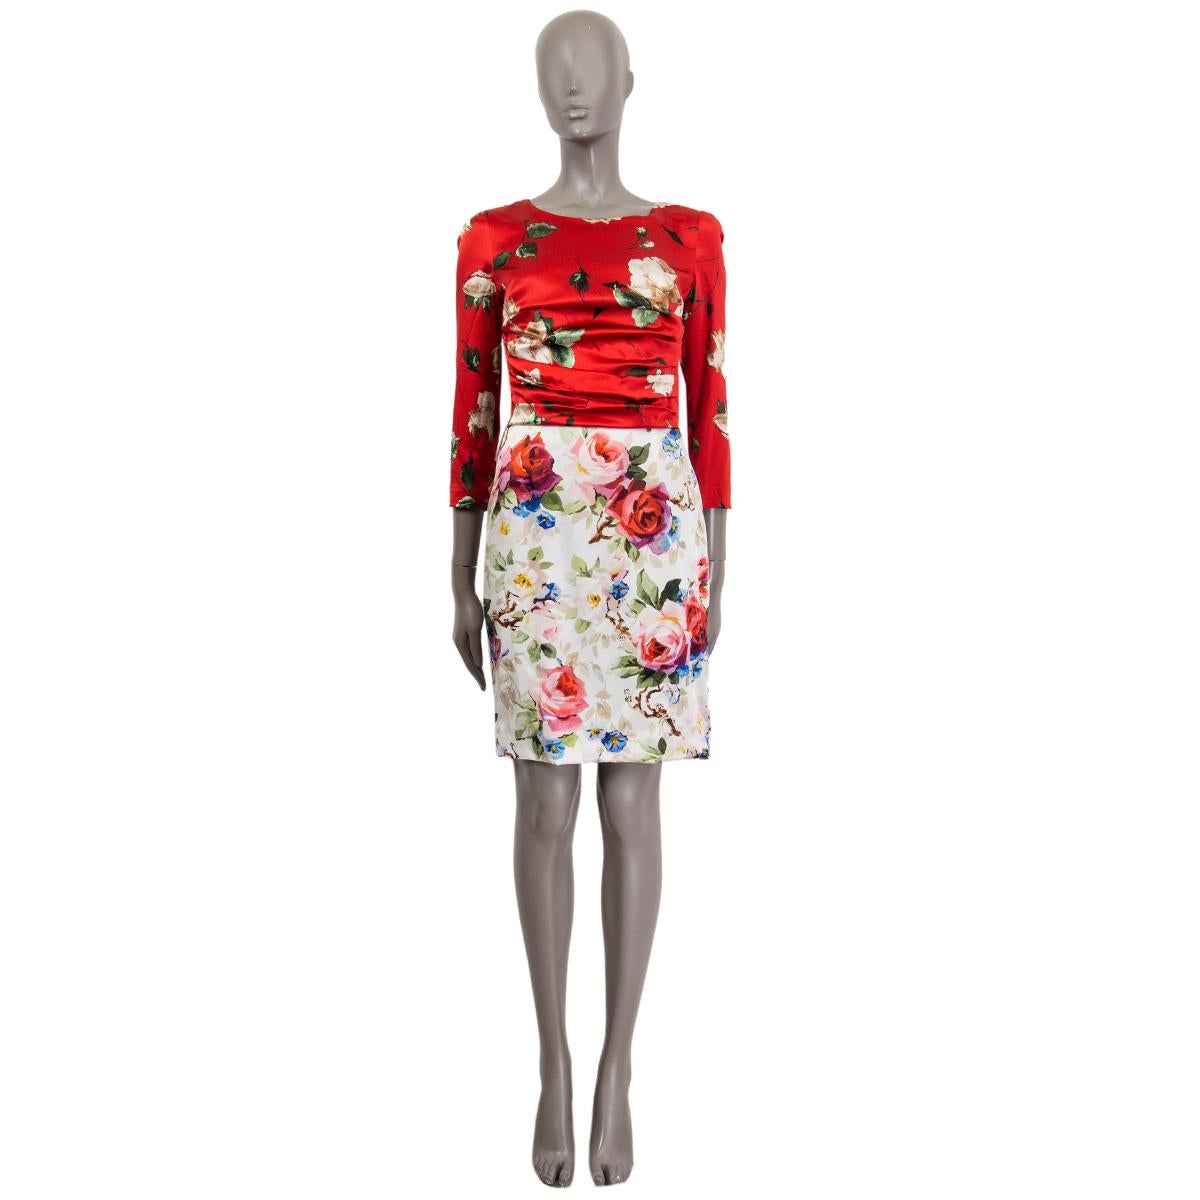 100% authentic Dolce & Gabbana rose print sheath dress in multi-color silk (92%) and elastane (8%) with a round neck. Closes on the back with a concealed zipper. Lined in silk (97%) and elastane (3%). Has been worn and is in excellent condition.